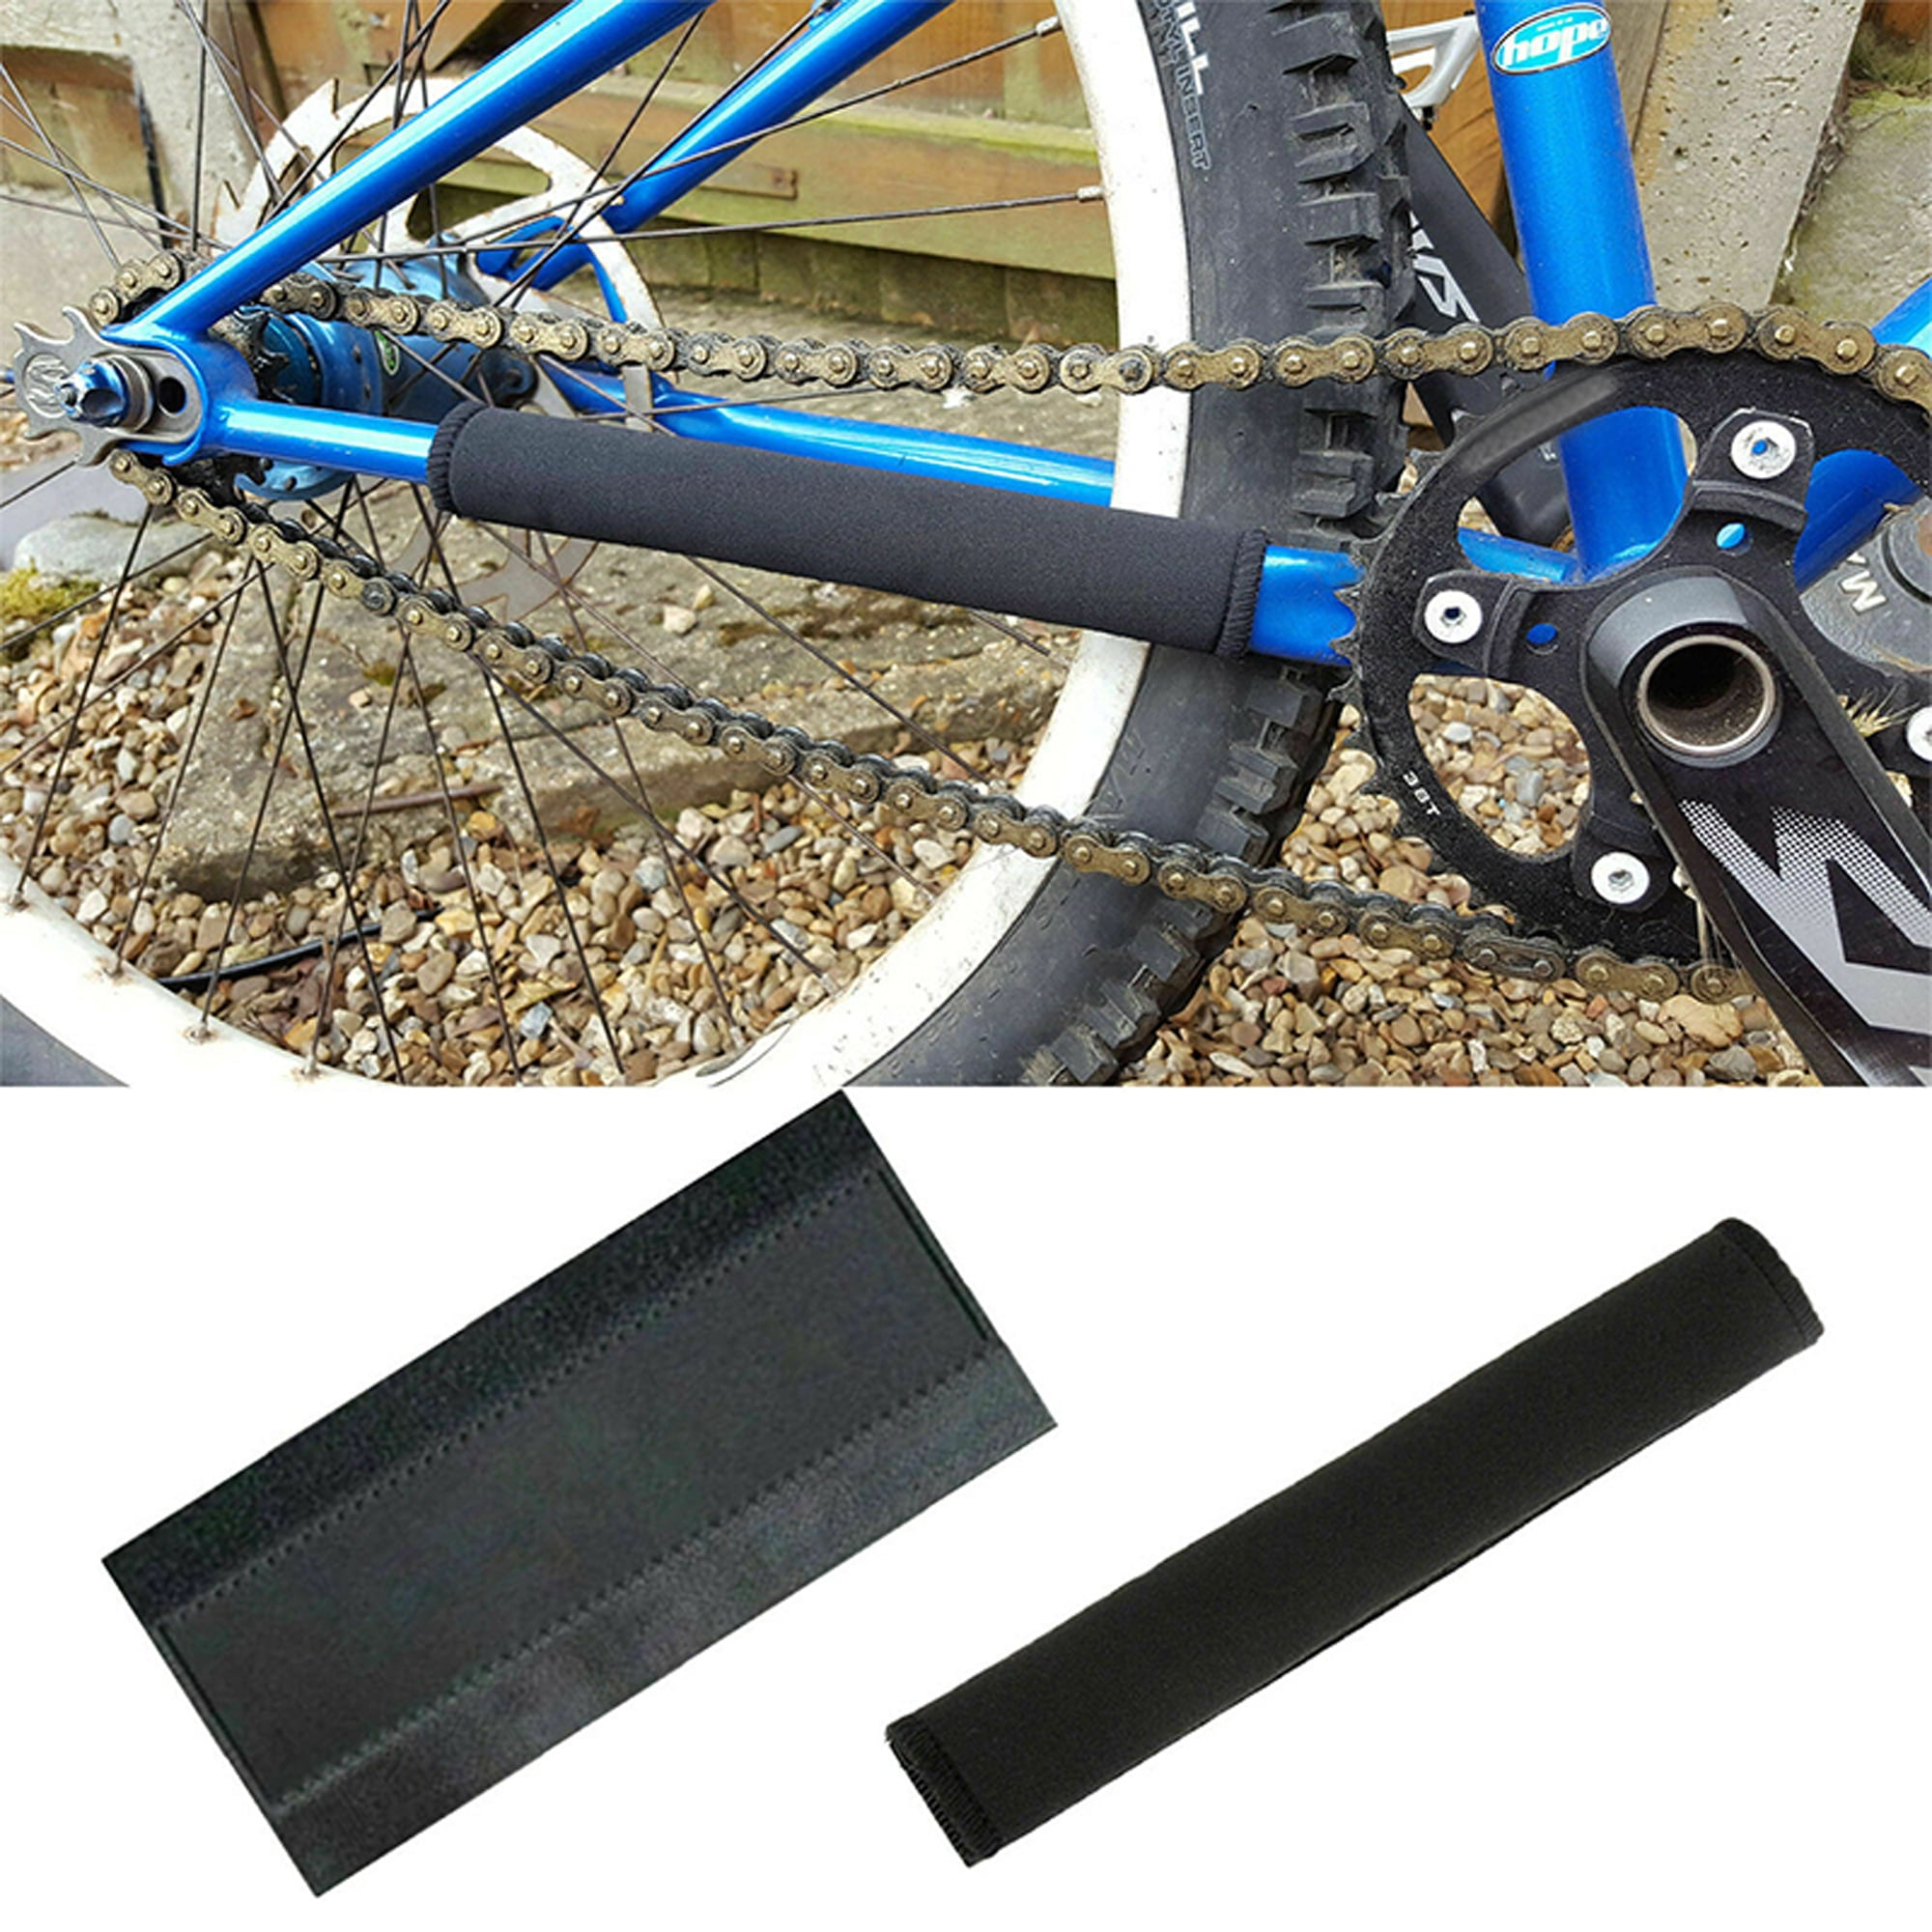 2x Mountain Road Bike Chain Protection Plastic Posted Protector Chains Guard New